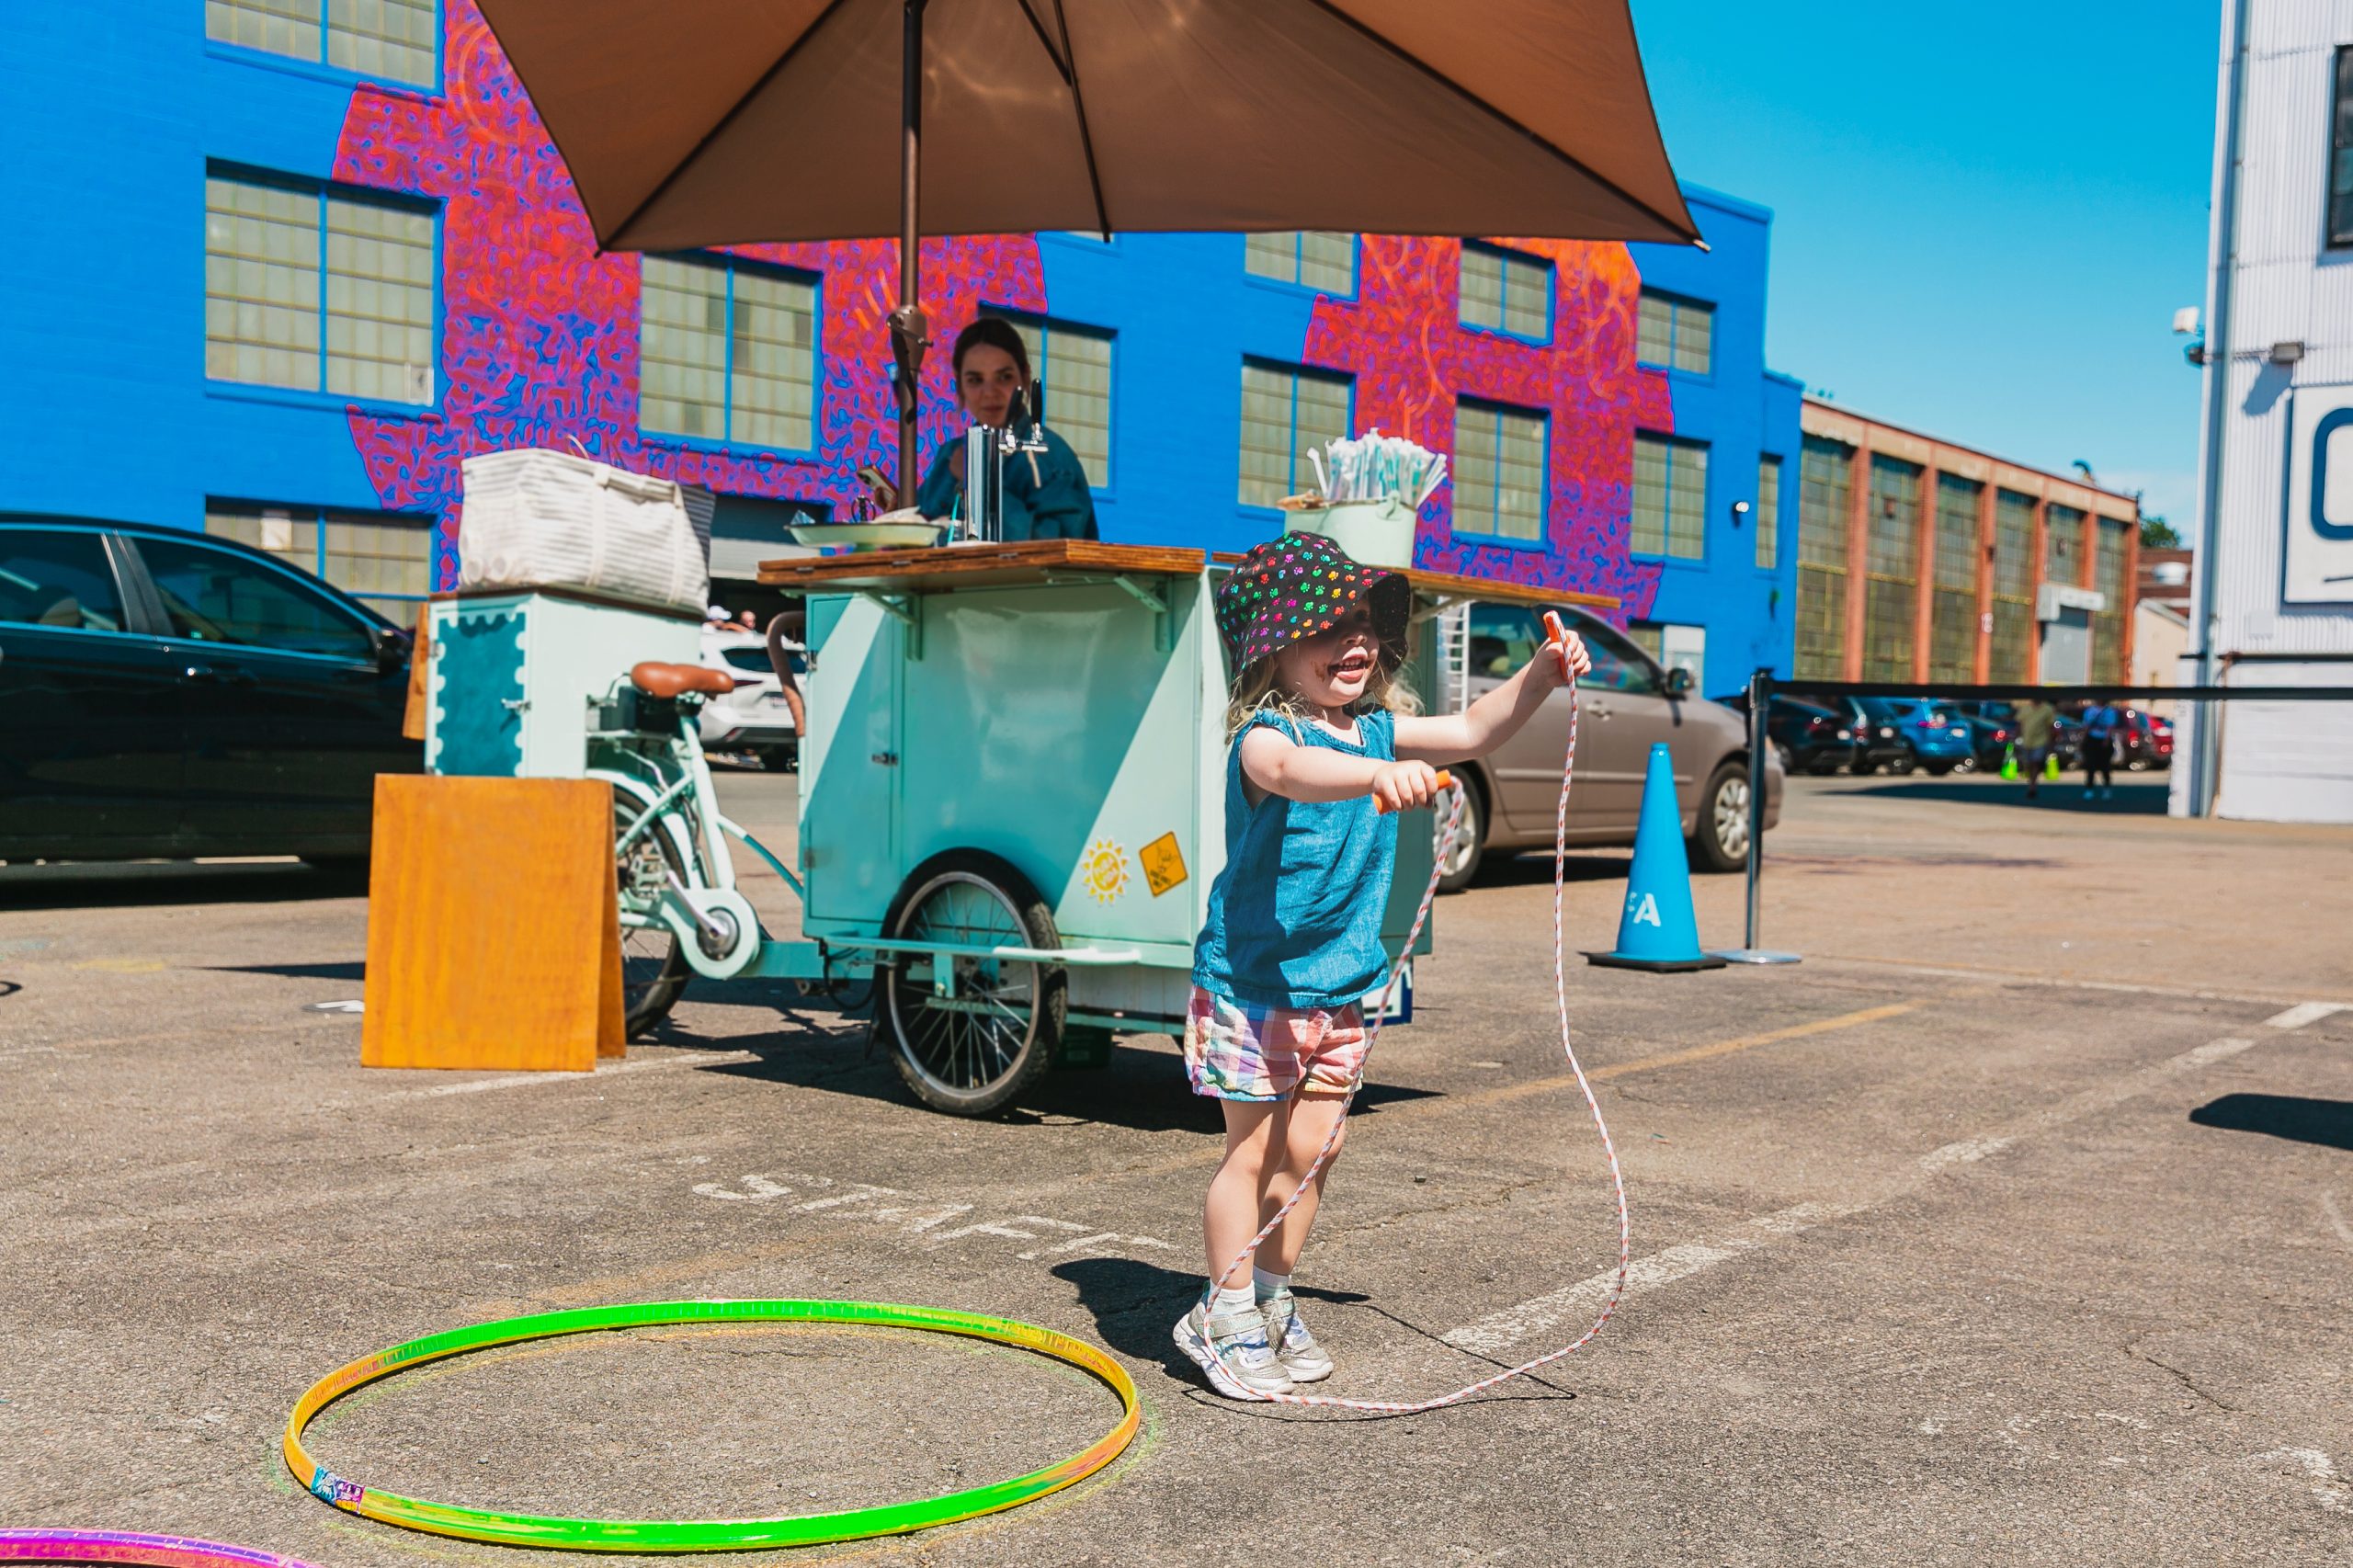 A young child in bright clothing plays with a hula hoop and jump rope outside in East Boston